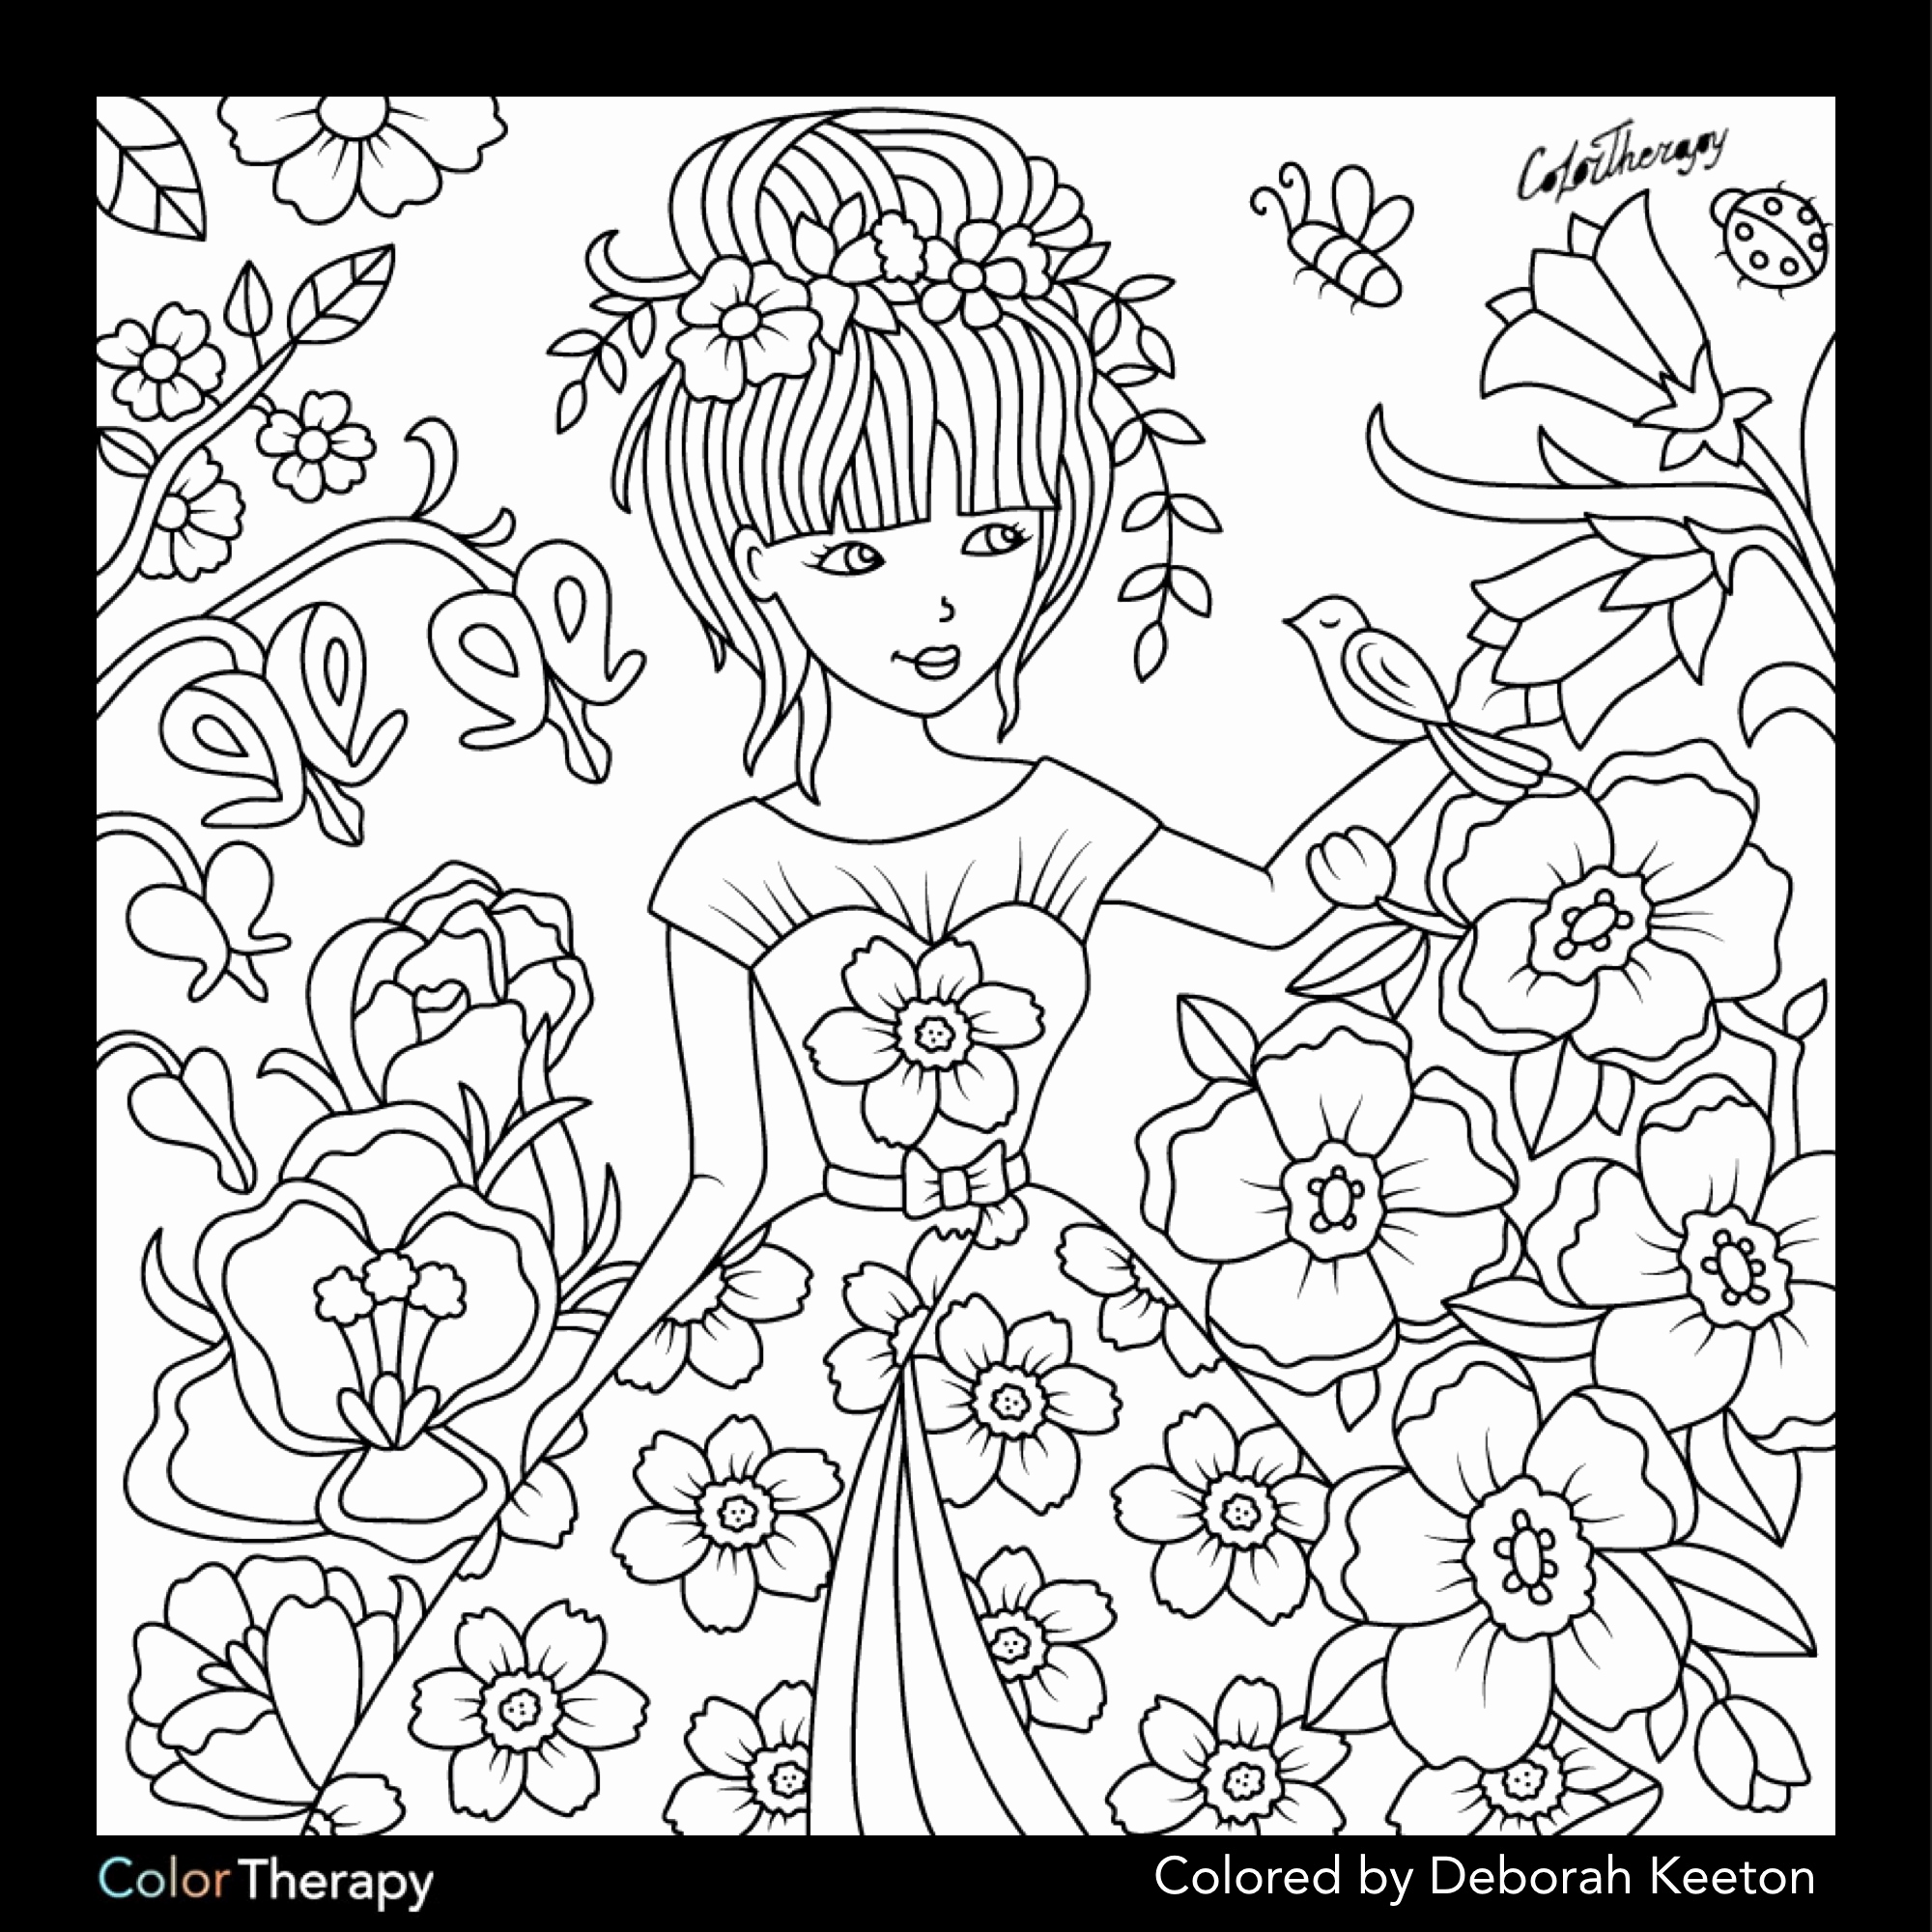 Construction Site Coloring Pages At Getcolorings.com | Free Printable